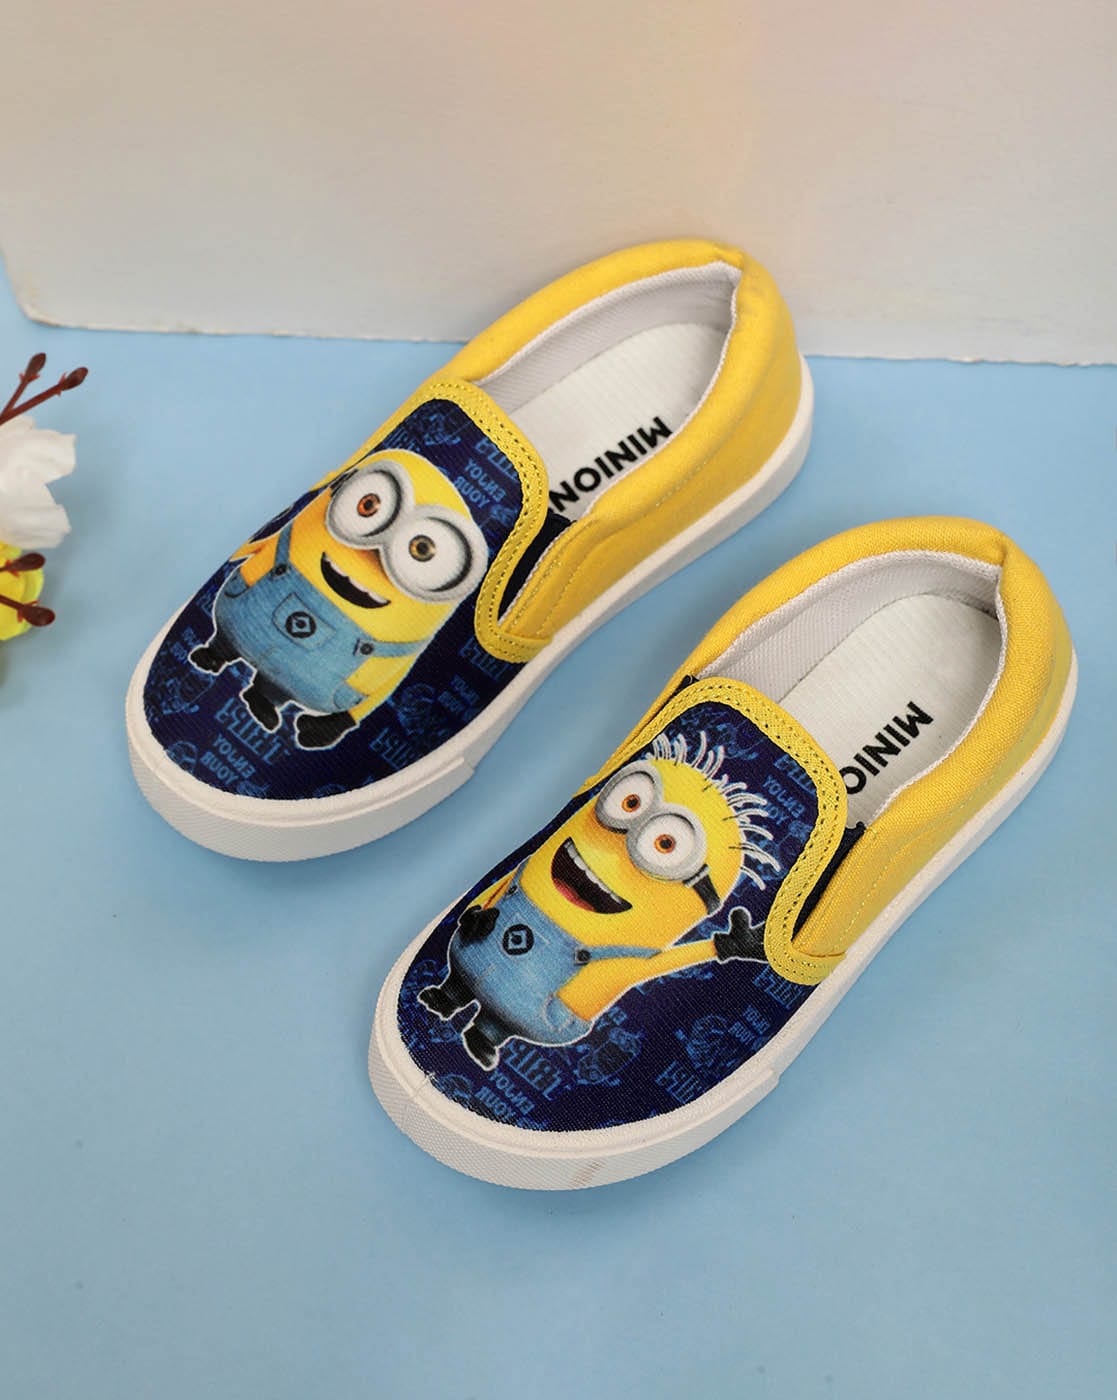 Universal | Accessories | Minion Shoes Gently Used Small 56 | Poshmark